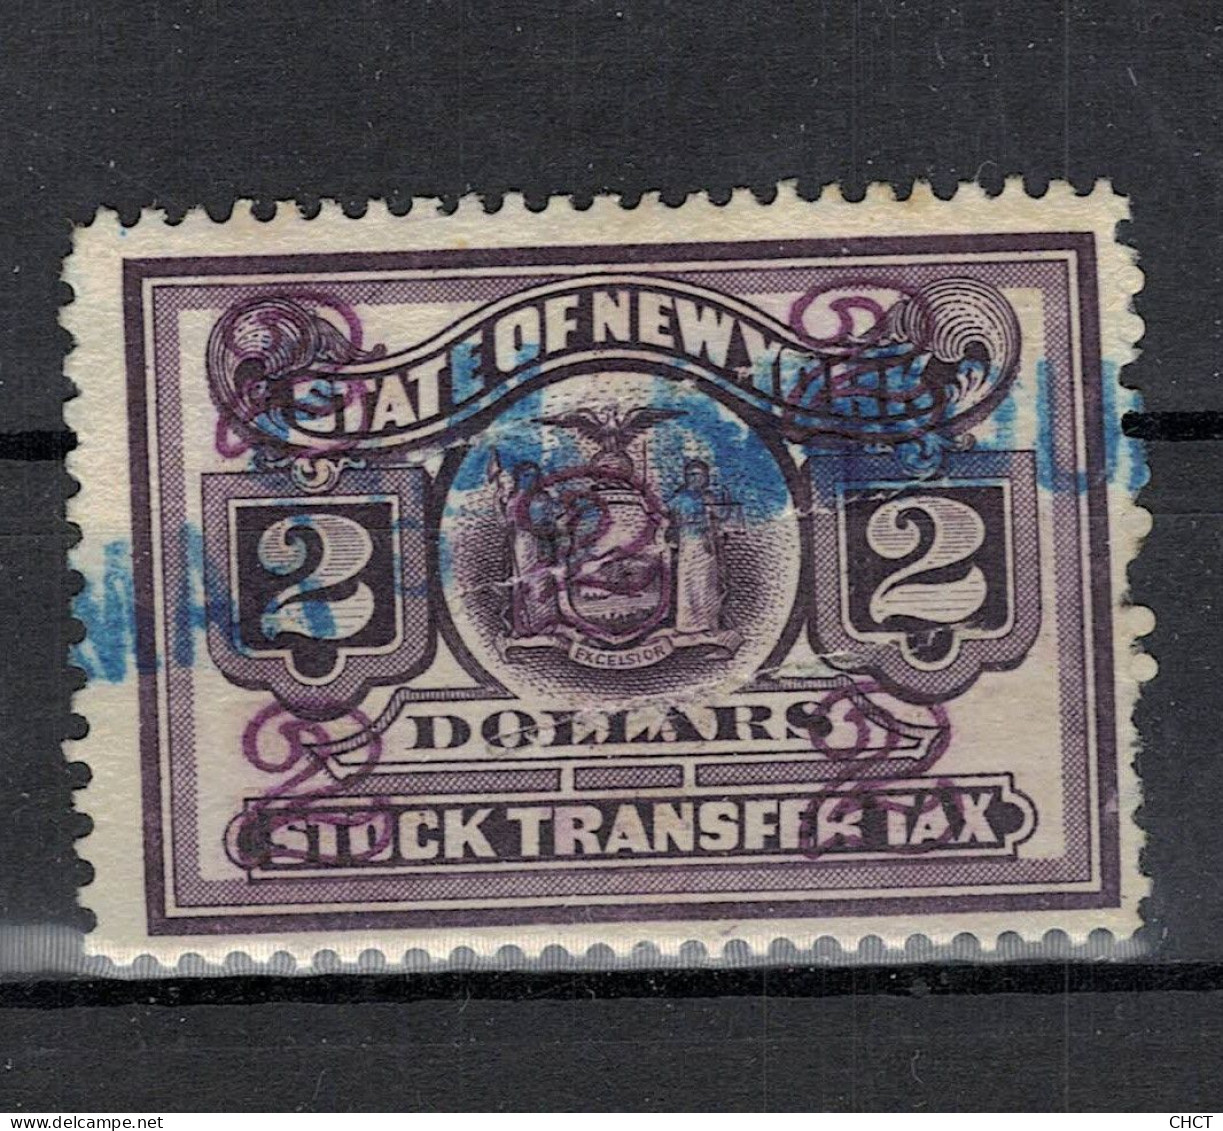 CHCT26 - State Of New York, Stock Transfer Tax Stamp, America - Unclassified